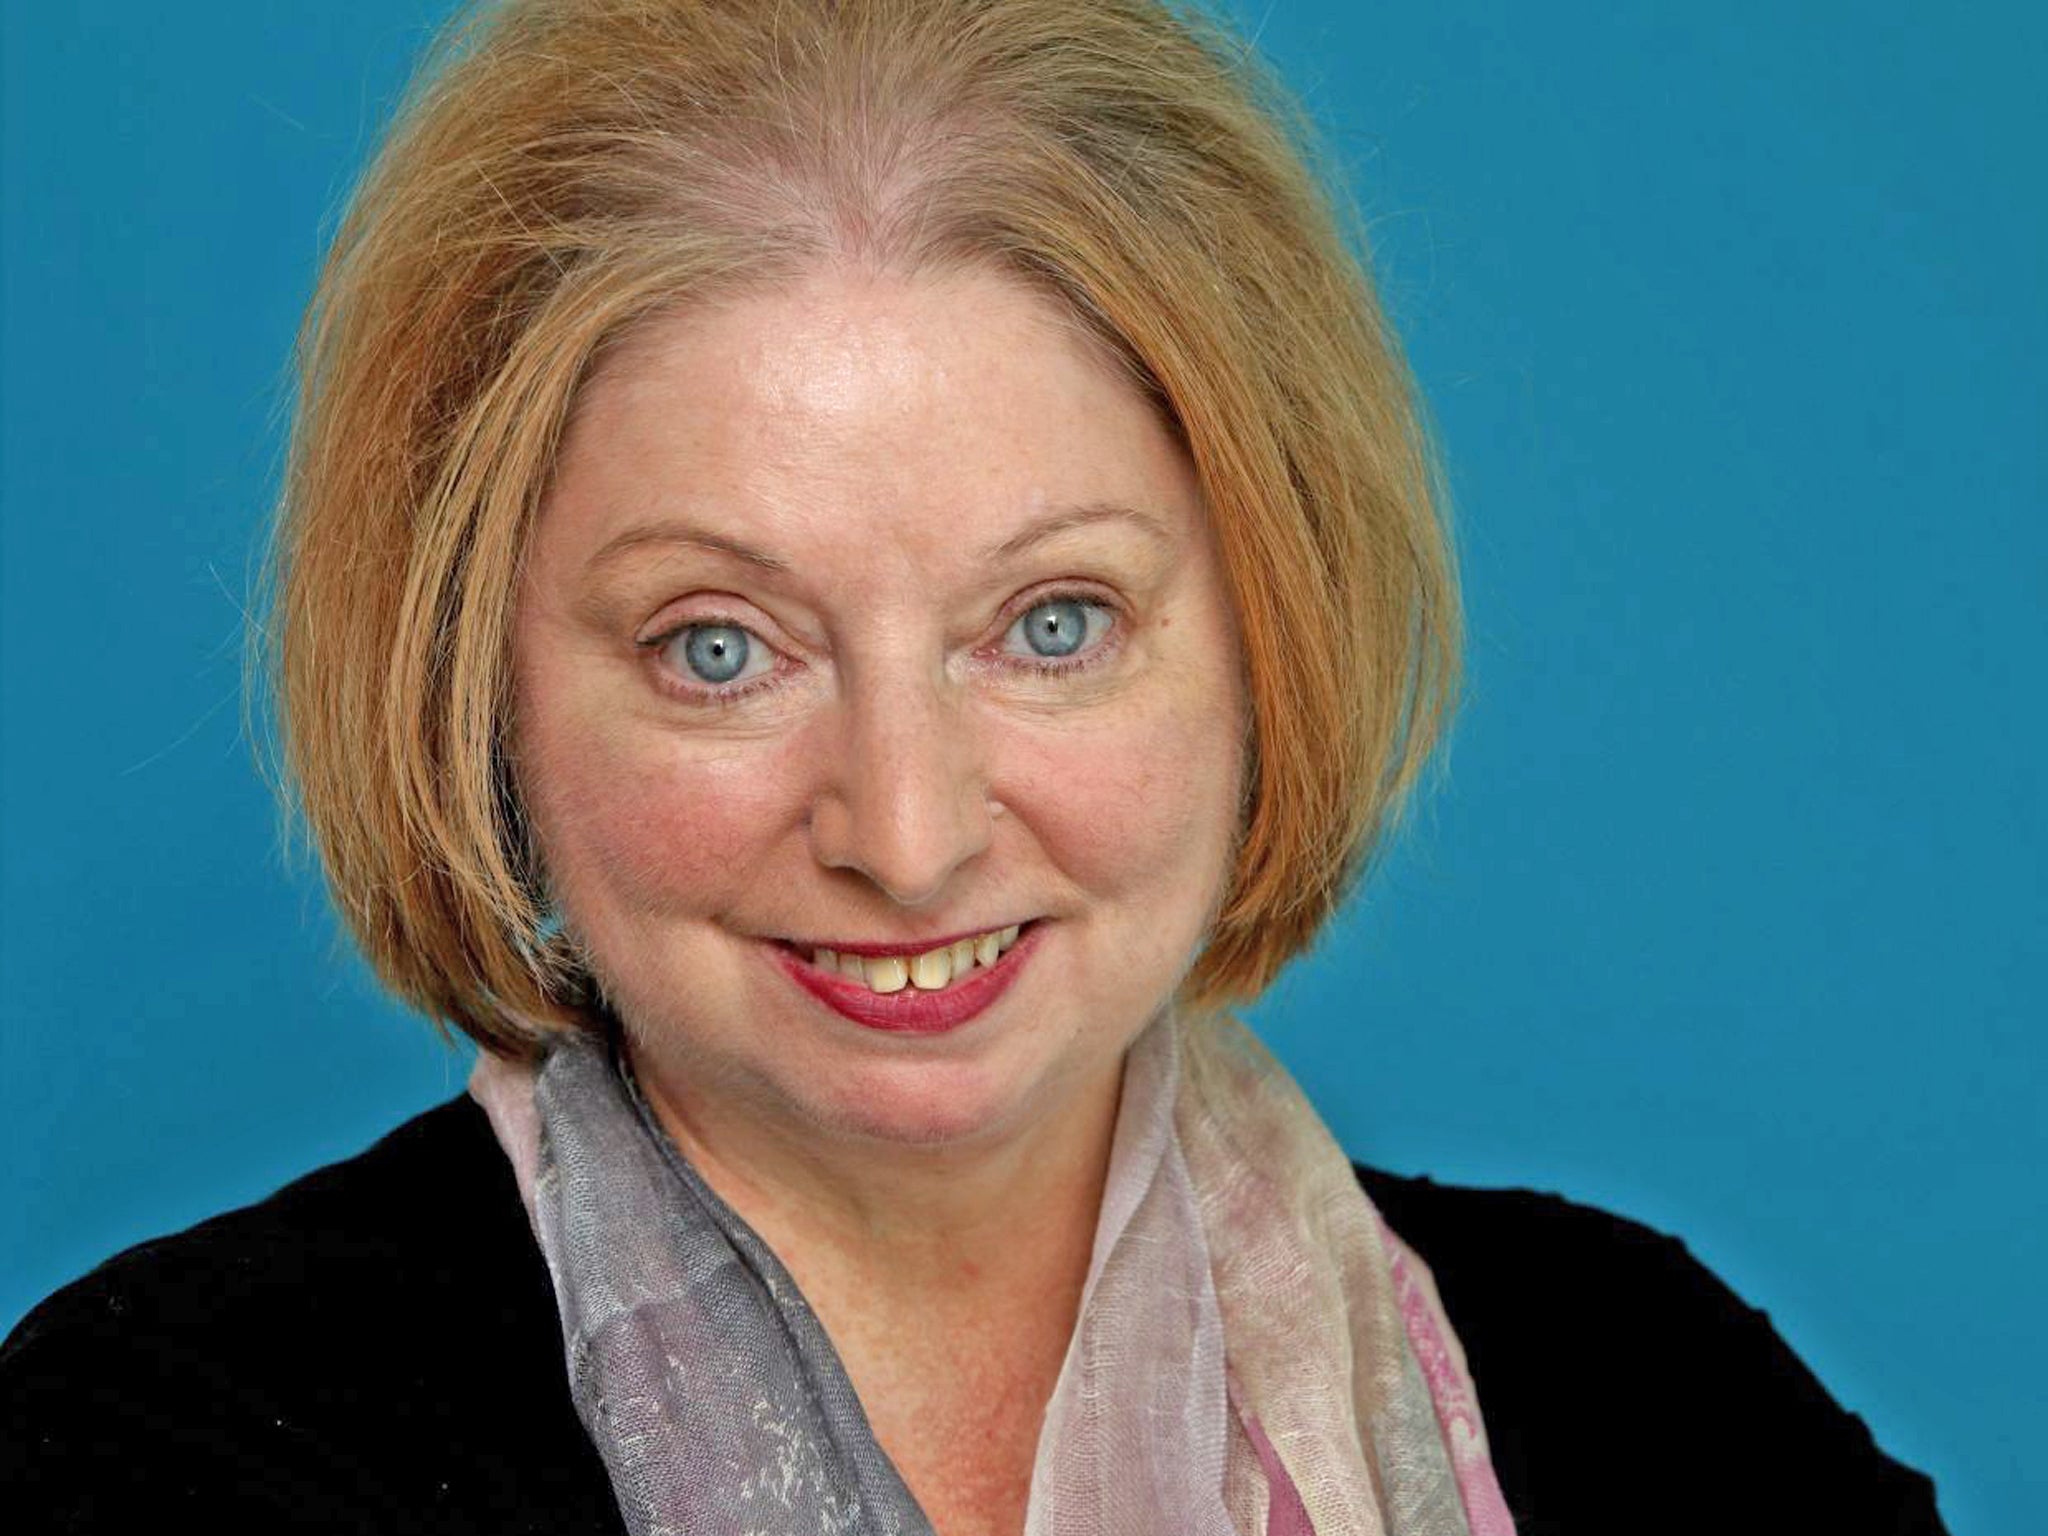 Hilary Mantel faces six newcomers on the 2013 Women's Prize for fiction longlist